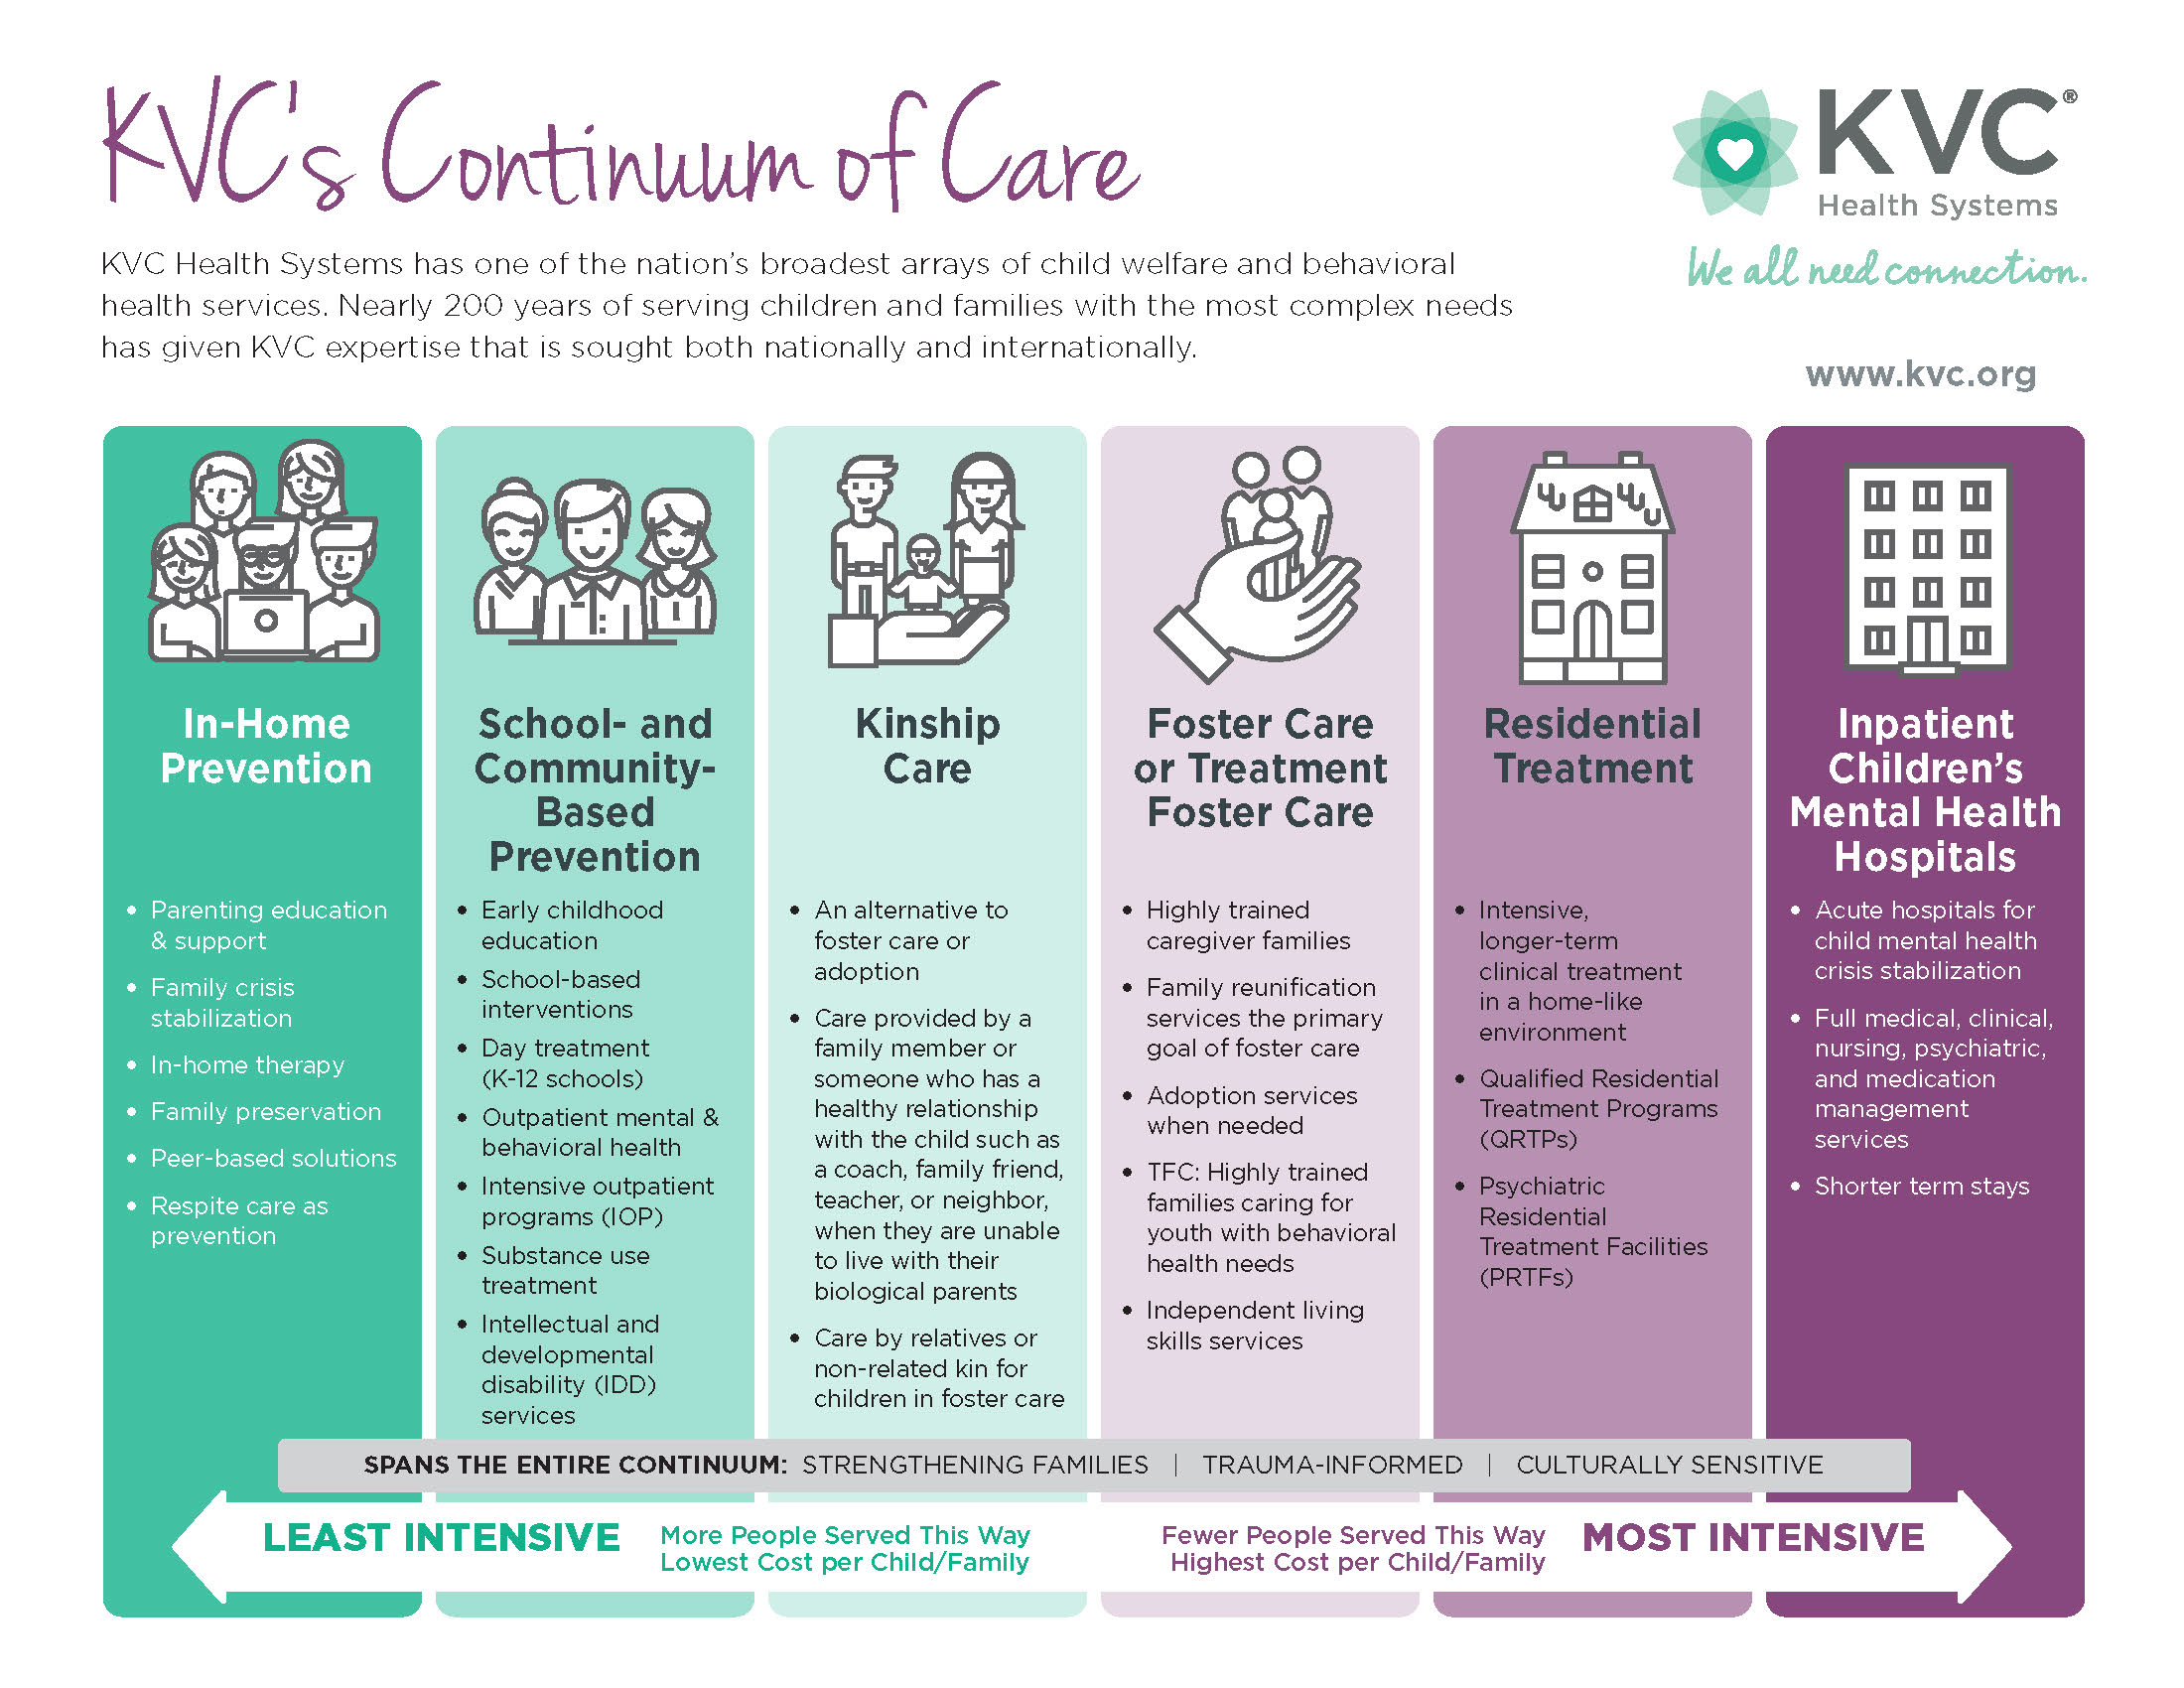 KVC Health Systems continuum of care - KVC Missouri - foster care, child welfare, children's mental health, residential treatment, inpatient mental health hospitals and more